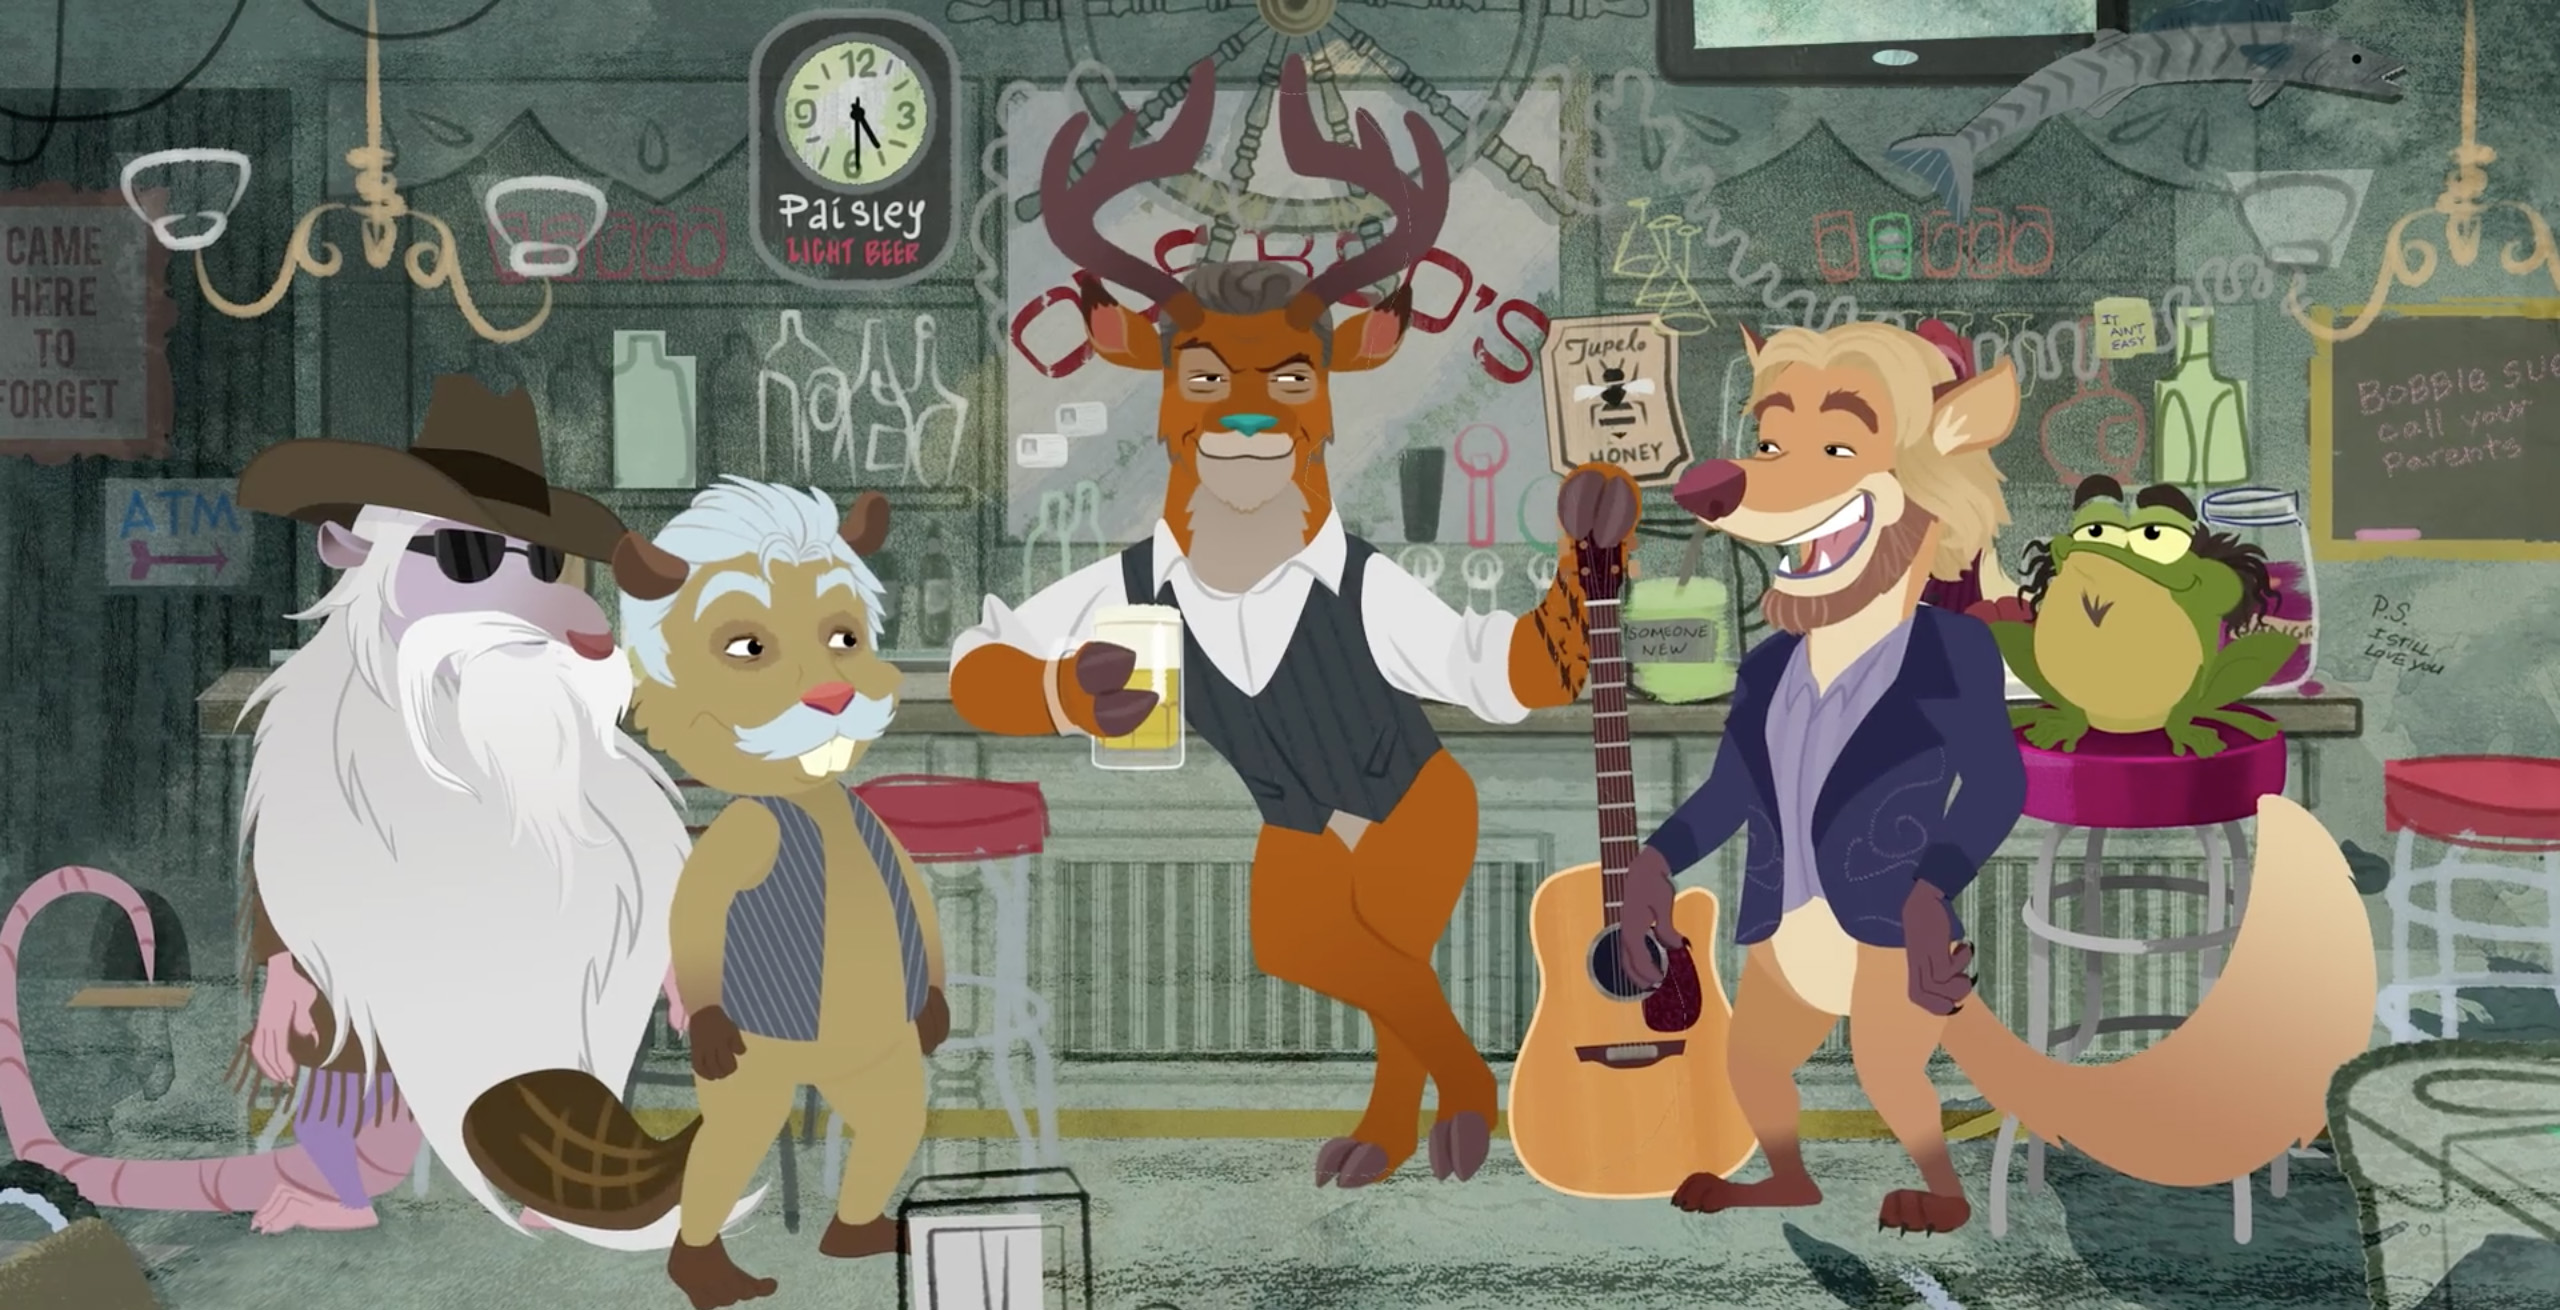 Blake Shelton and The Oak Ridge Boys Get ‘Animated’ in “Doing It to Country Songs” Music Video